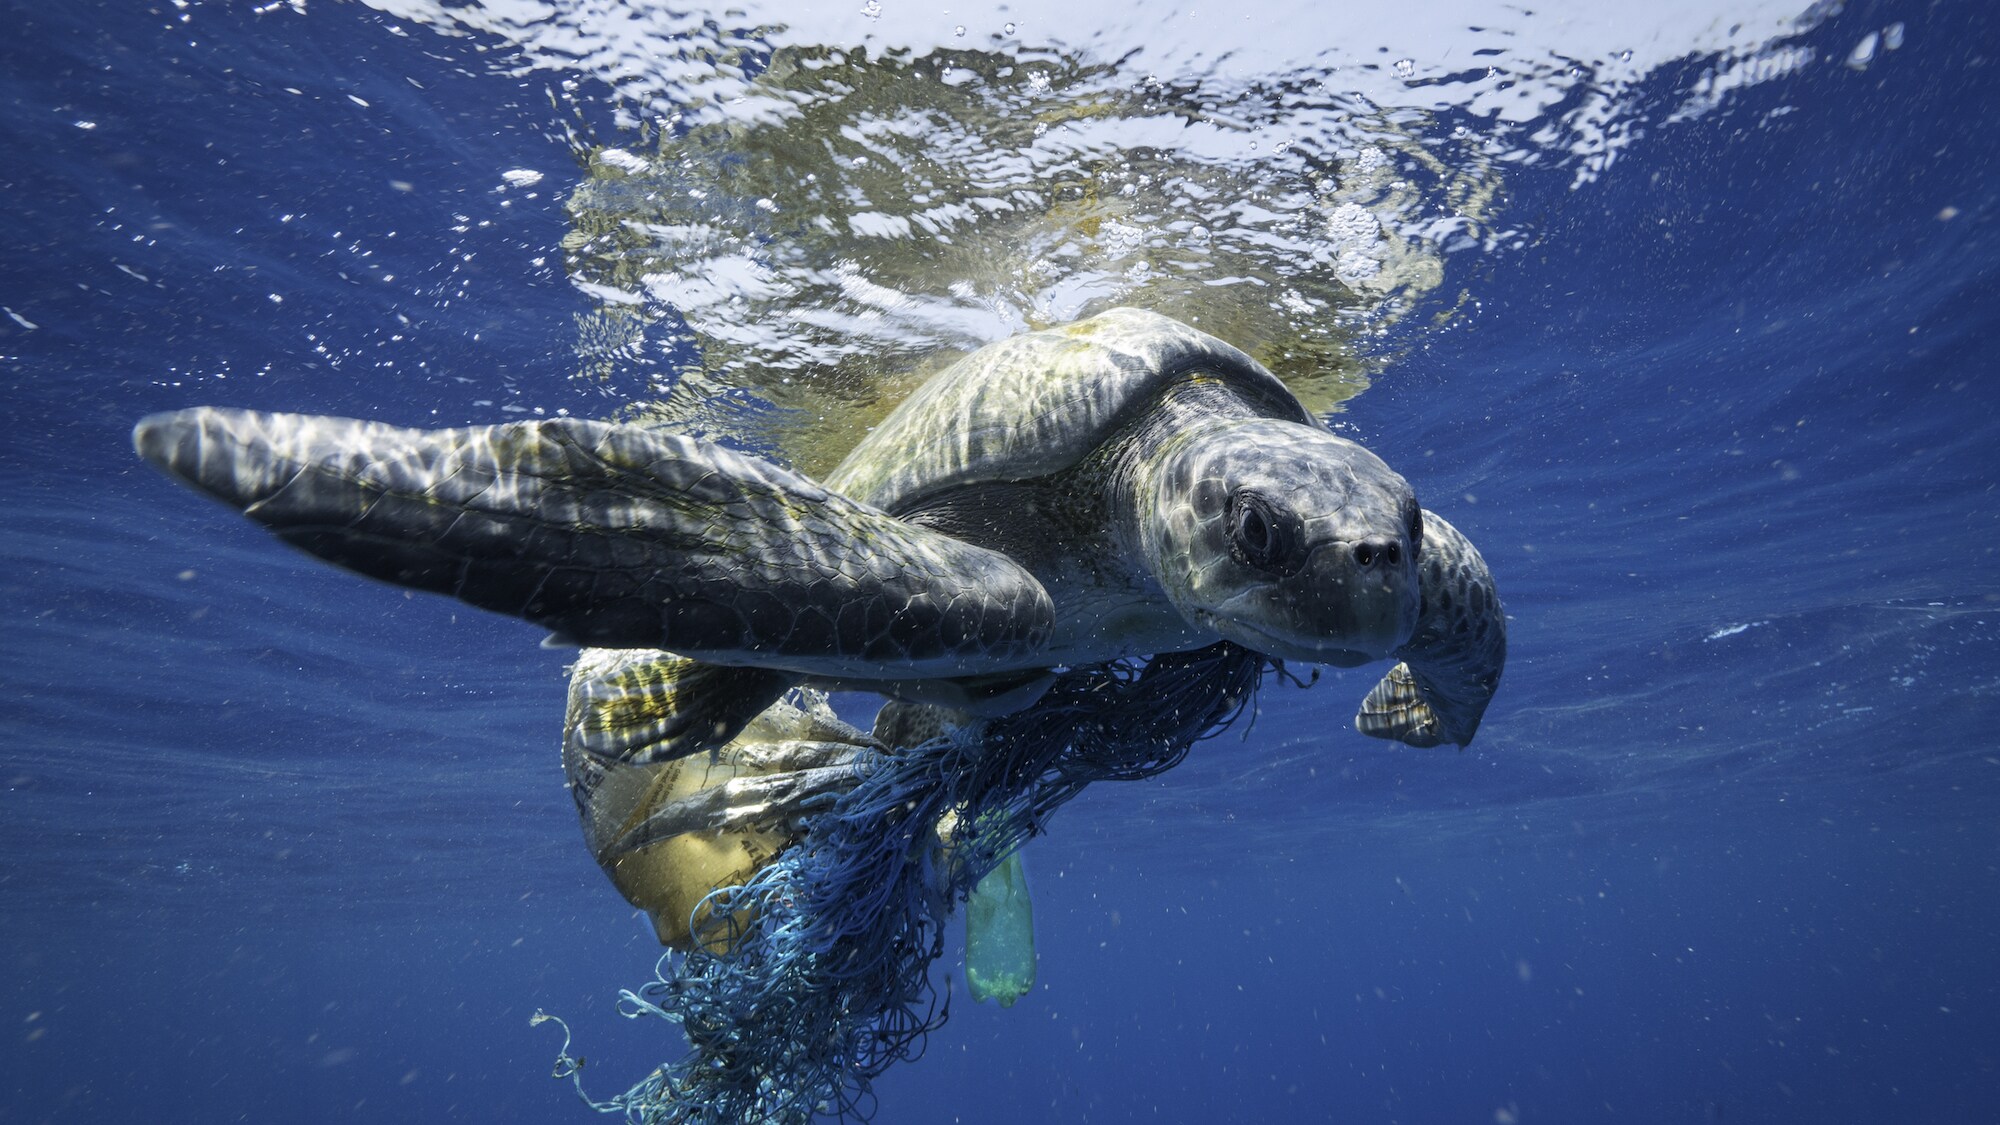 Fishing gear is the most common form of plastic pollution in the ocean, and it is often lethal to marine wildlife, including whales. The National Geographic team saved this sea turtle while on assignment in the Indian Ocean. (National Geographic for Disney+/Hayes Baxley)